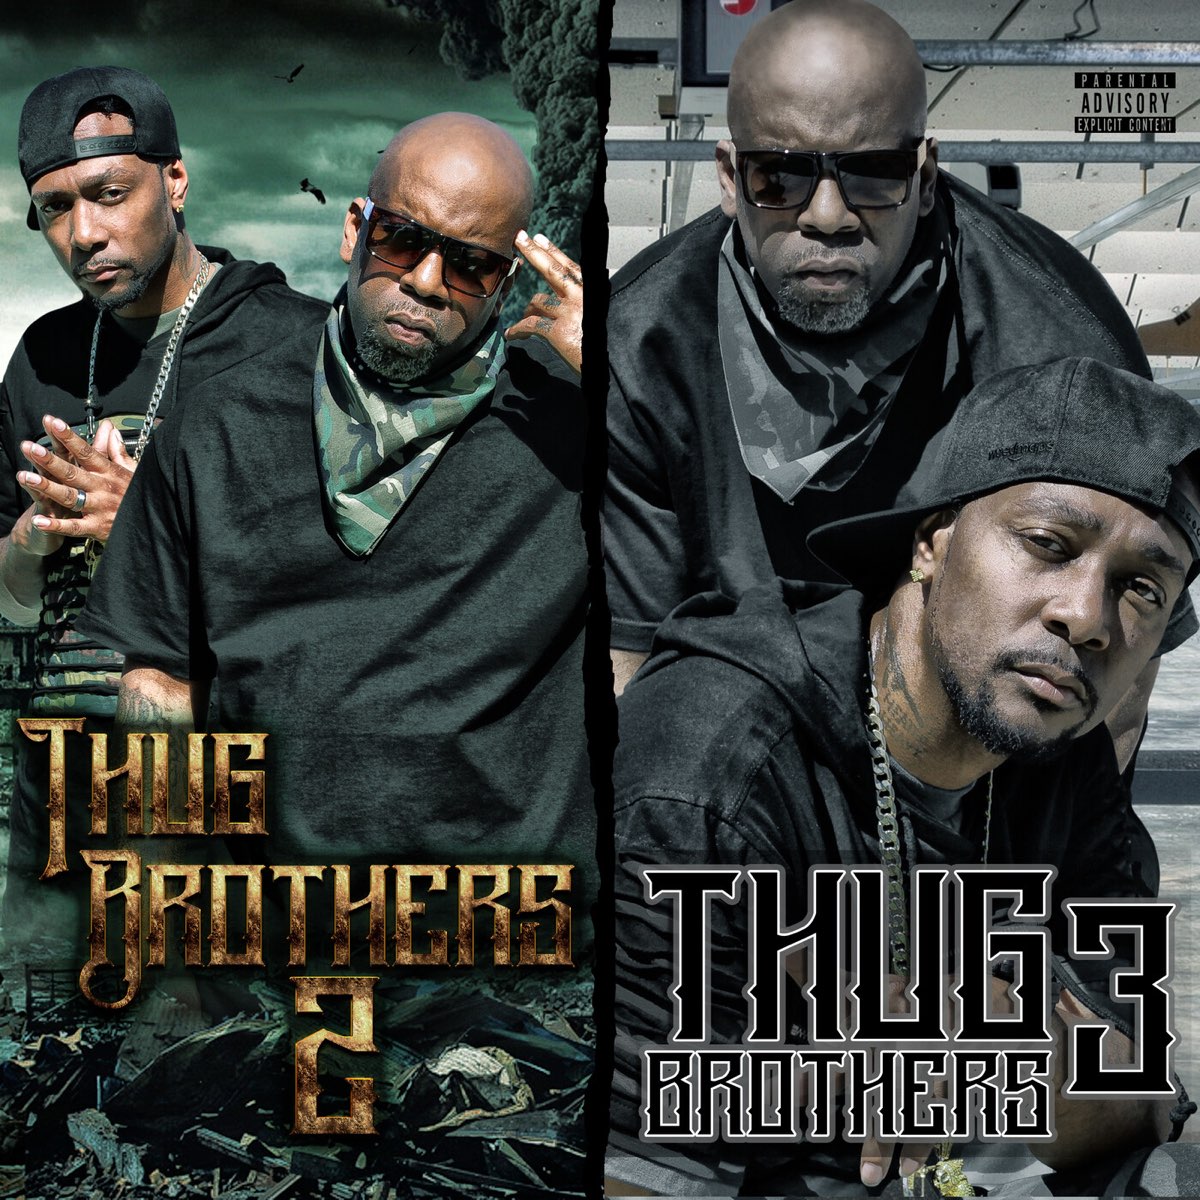 ‎Thug Brothers 2 & 3 (Deluxe Edition) by Bone Thugs-n-Harmony & Outlawz ...